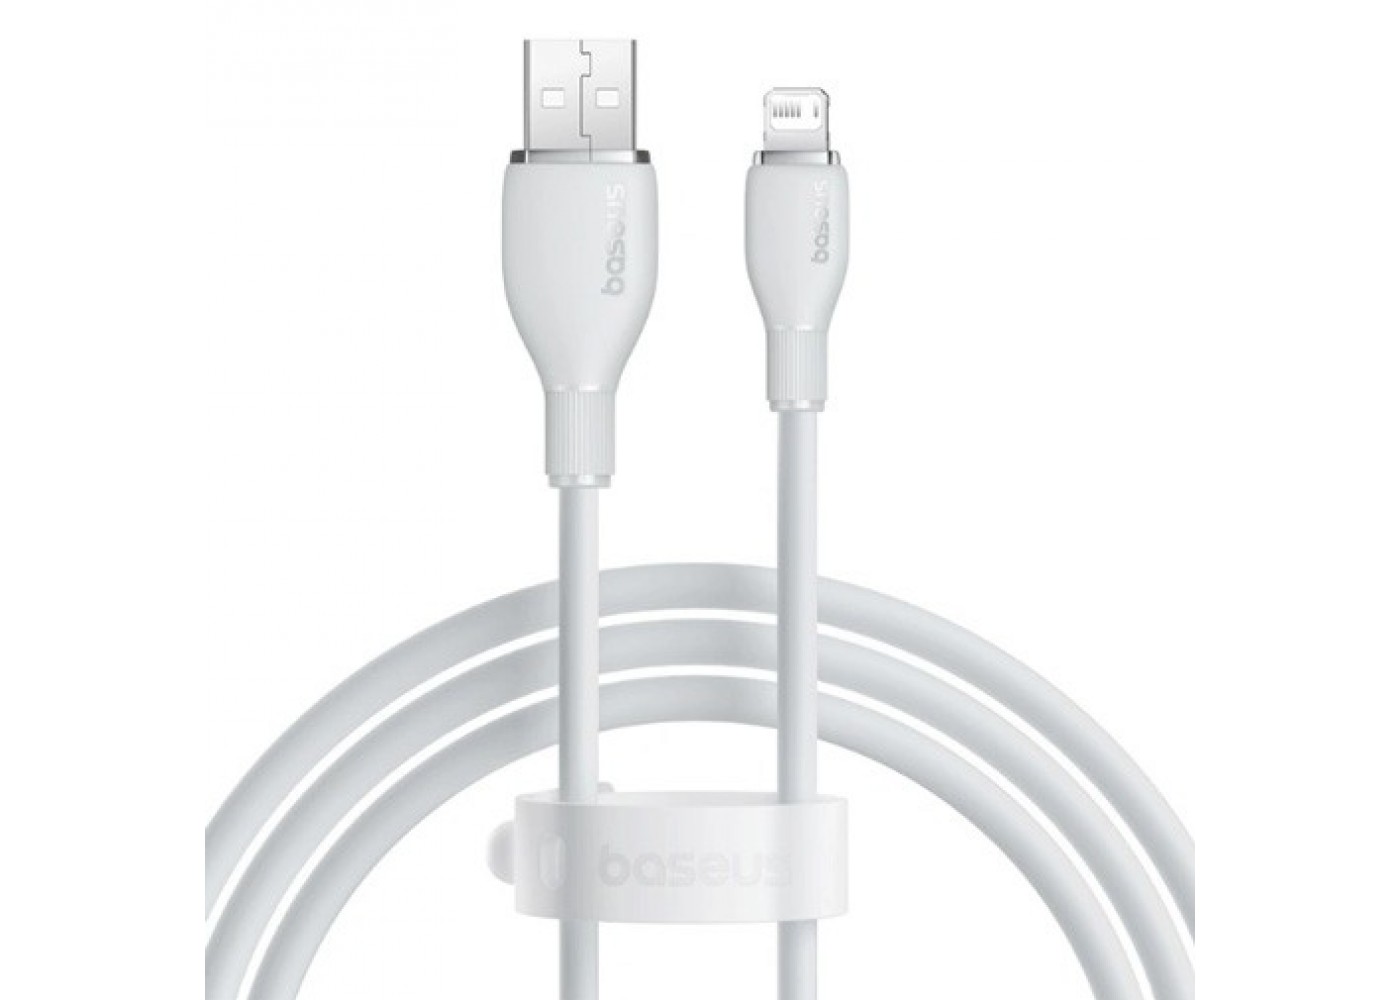 Кабель Baseus Pudding Series Fast Charging Cable USB to iP 2.4A 1.2m, Белый (P10355700221-00)